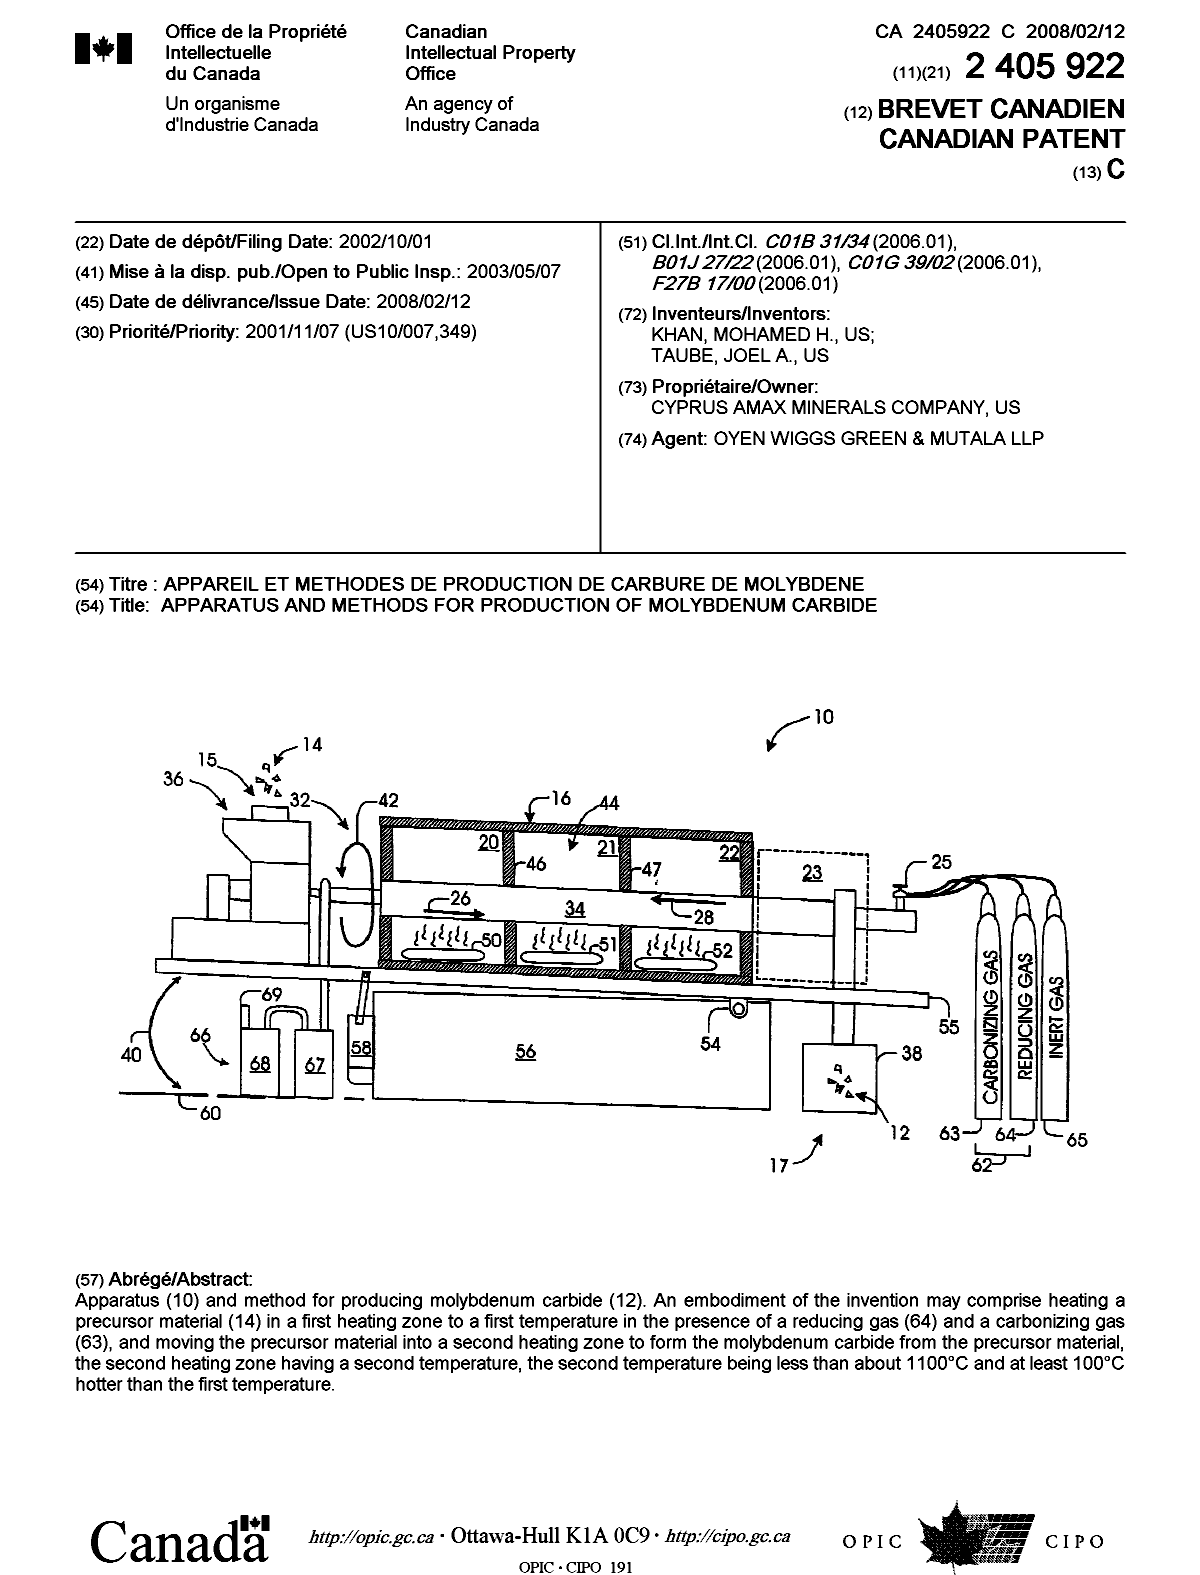 Canadian Patent Document 2405922. Cover Page 20080124. Image 1 of 1